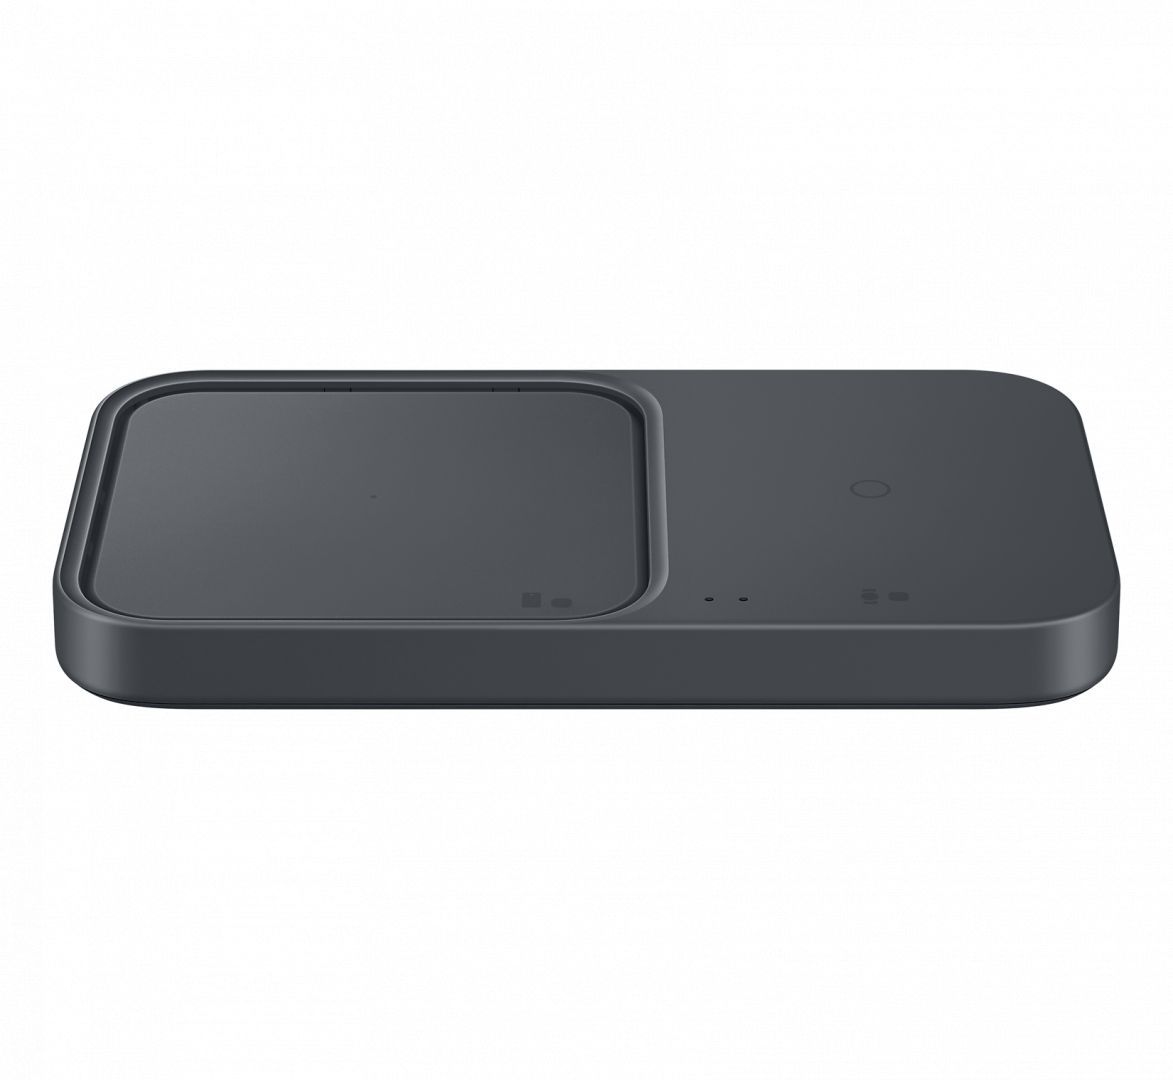 Samsung Super Fast Wireless Charger Duo Black